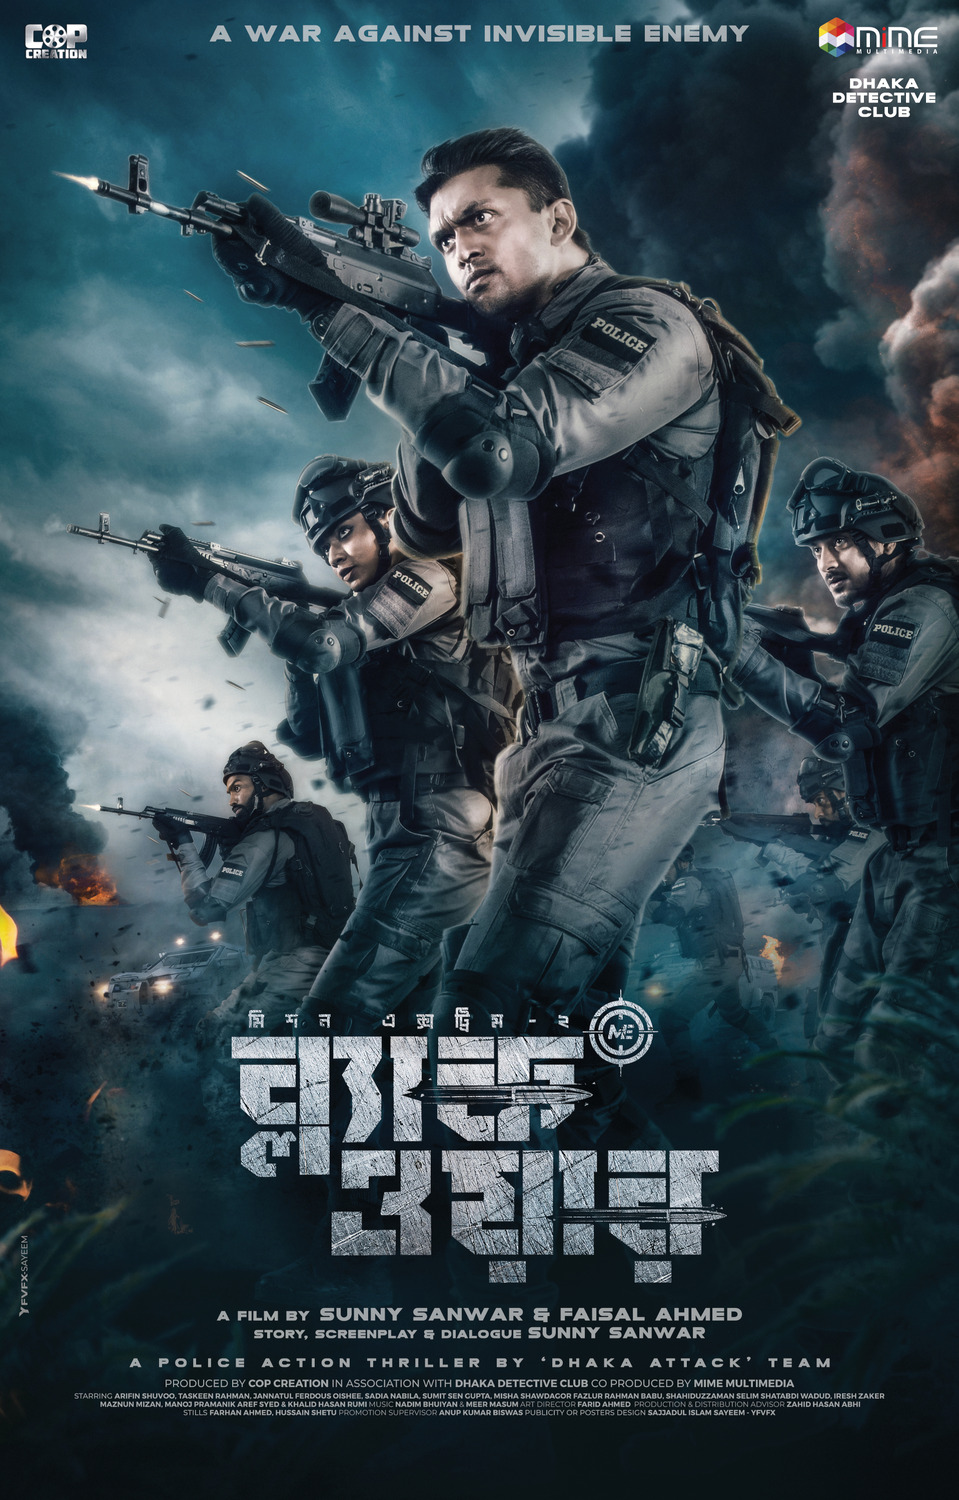 Extra Large Movie Poster Image for Black War: Mission Exteme 2 (#1 of 4)